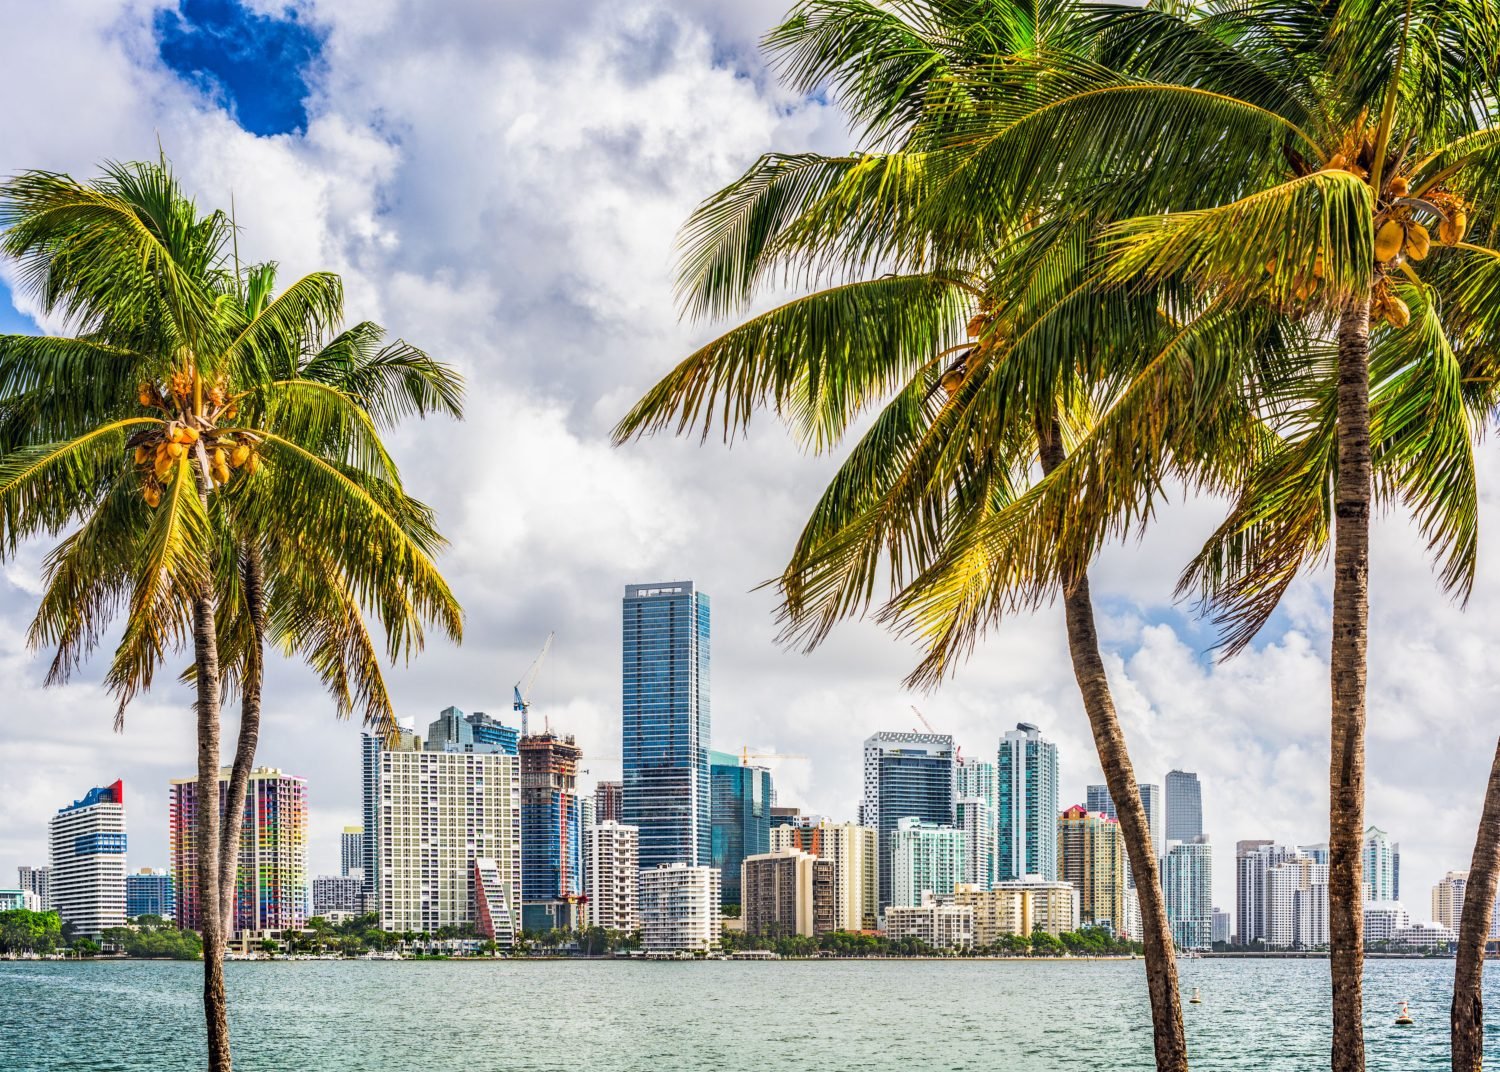 Florida to expand sizzling medical marijuana market with four new licenses | Cannabis Insight